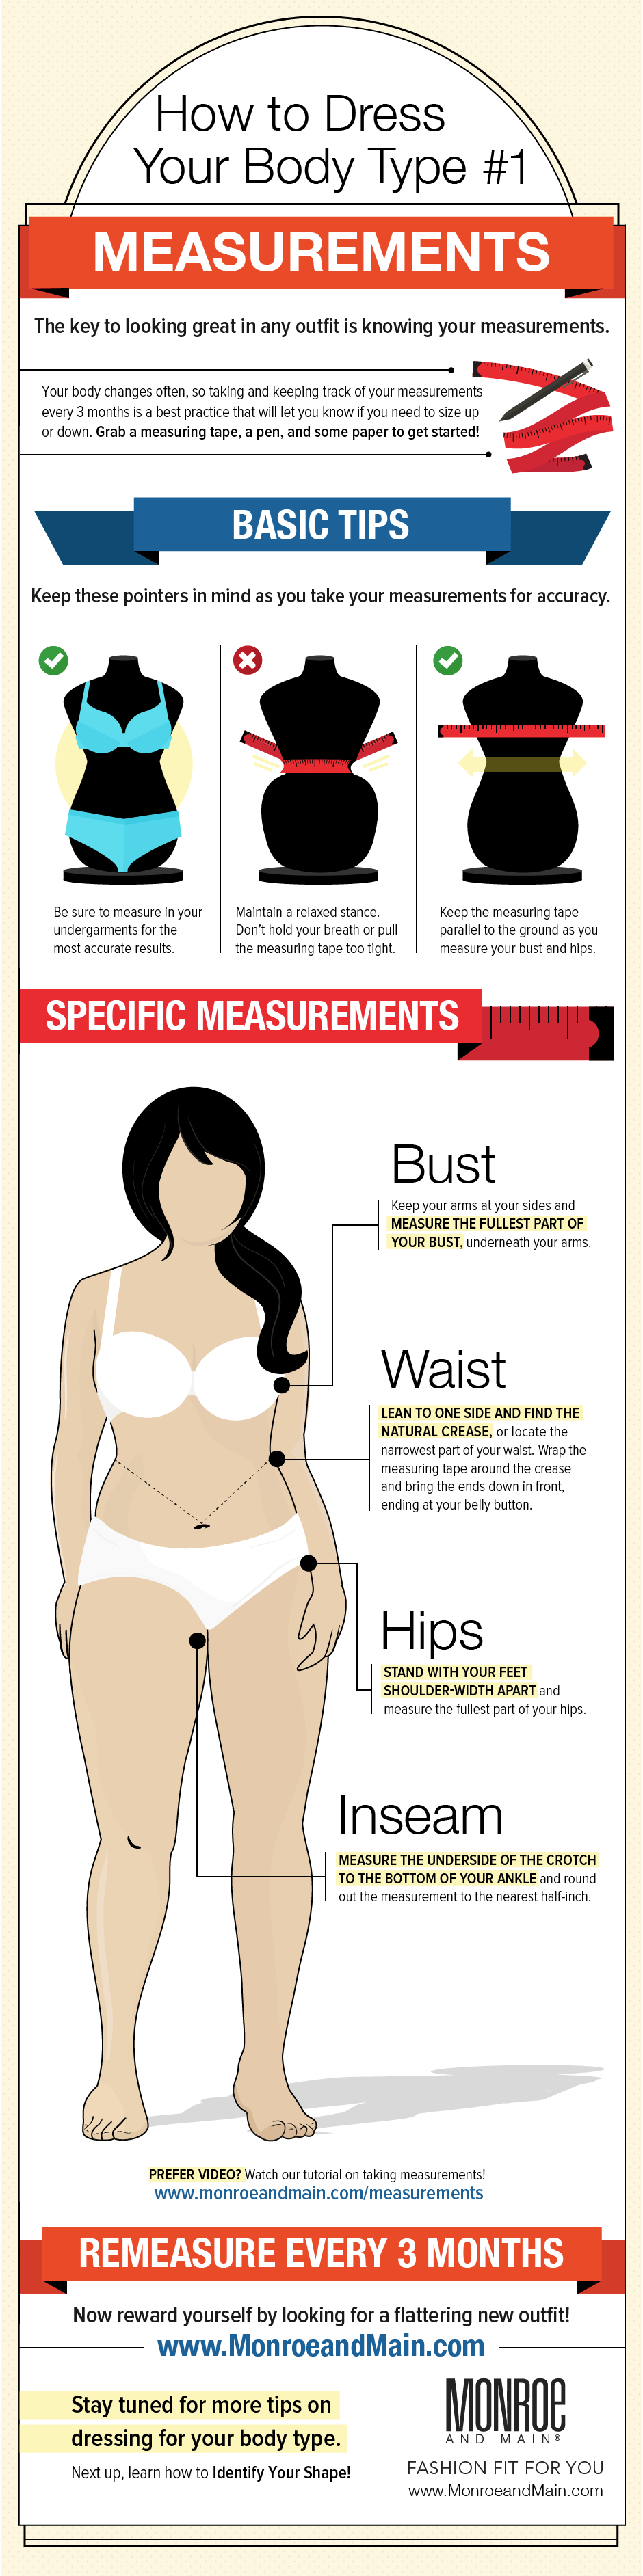 How to Dress for Your Body Type